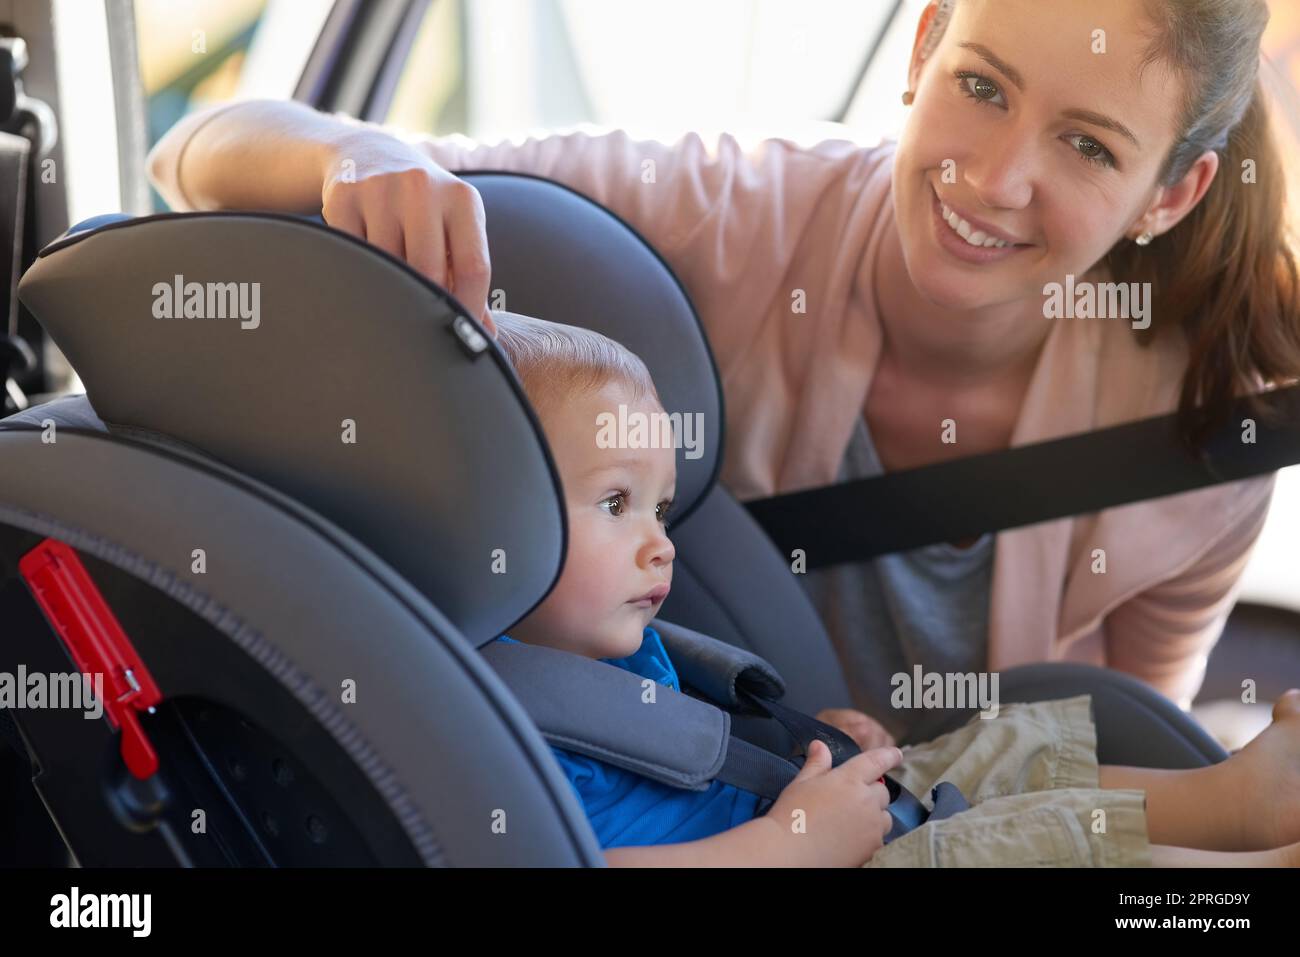 My childs safety is very important. Portrait of a mother fastening her baby boy safely in a car seat. Stock Photo